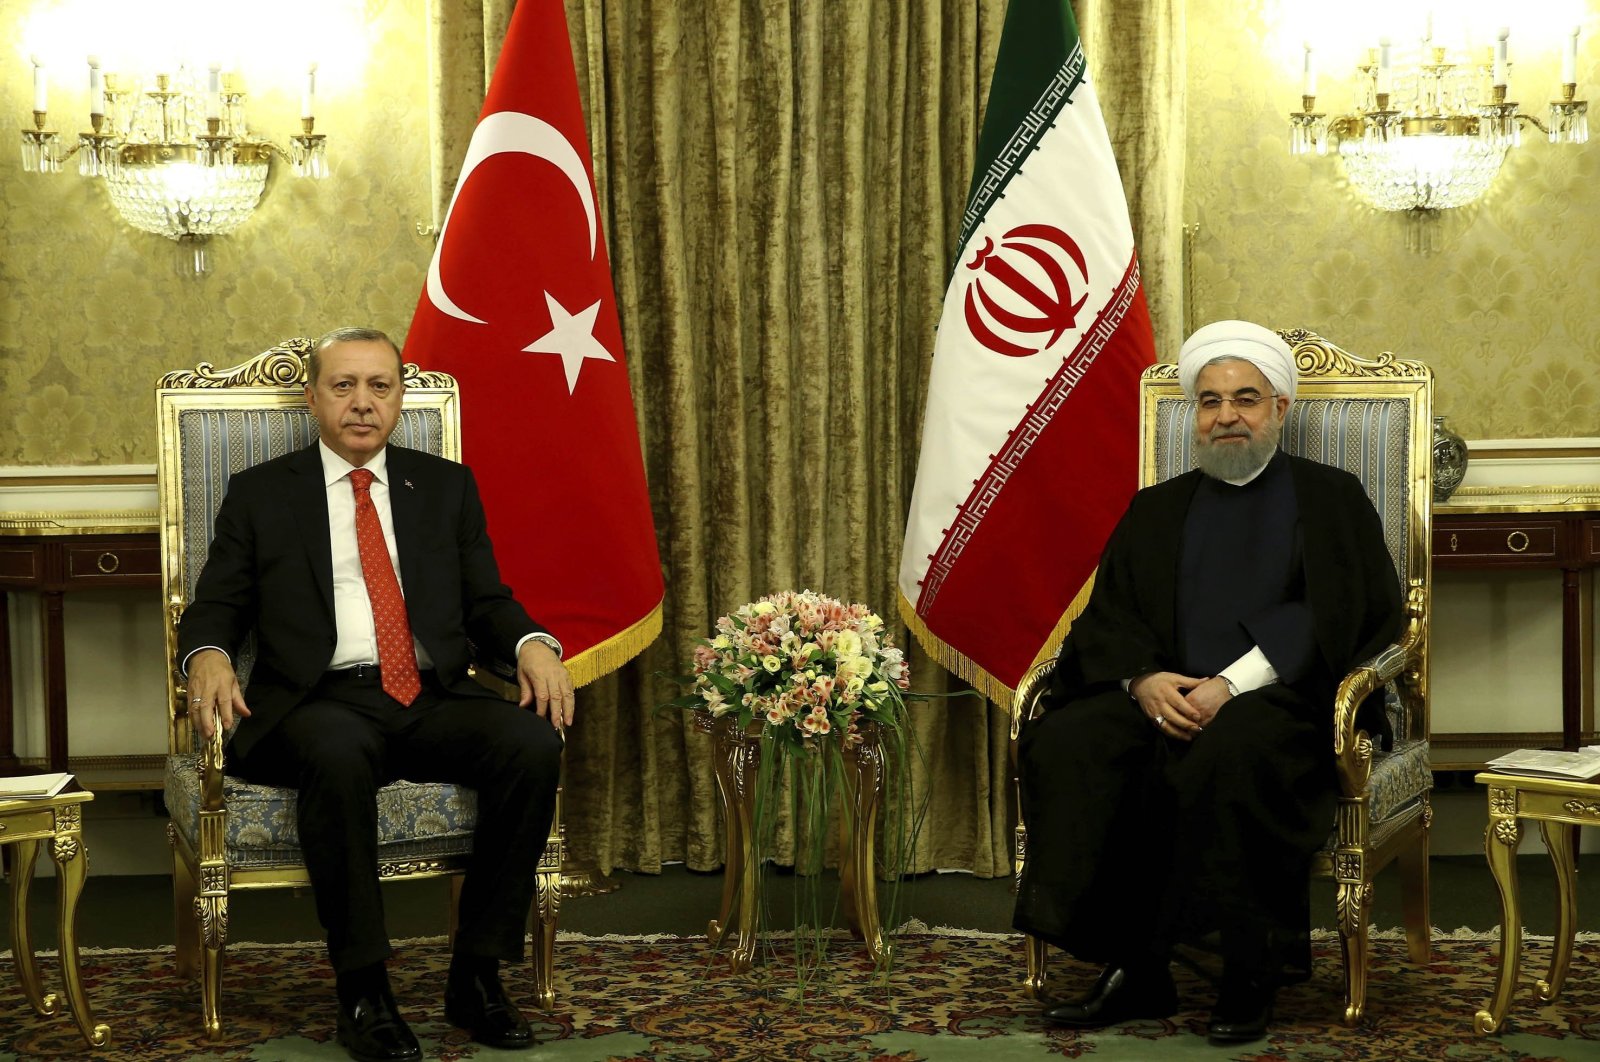 President Recep Tayyip Erdoğan (L) and Iranian President Hassan Rouhani are seen during a meeting in Tehran, Iran, Oct. 4, 2017. (AP Photo)